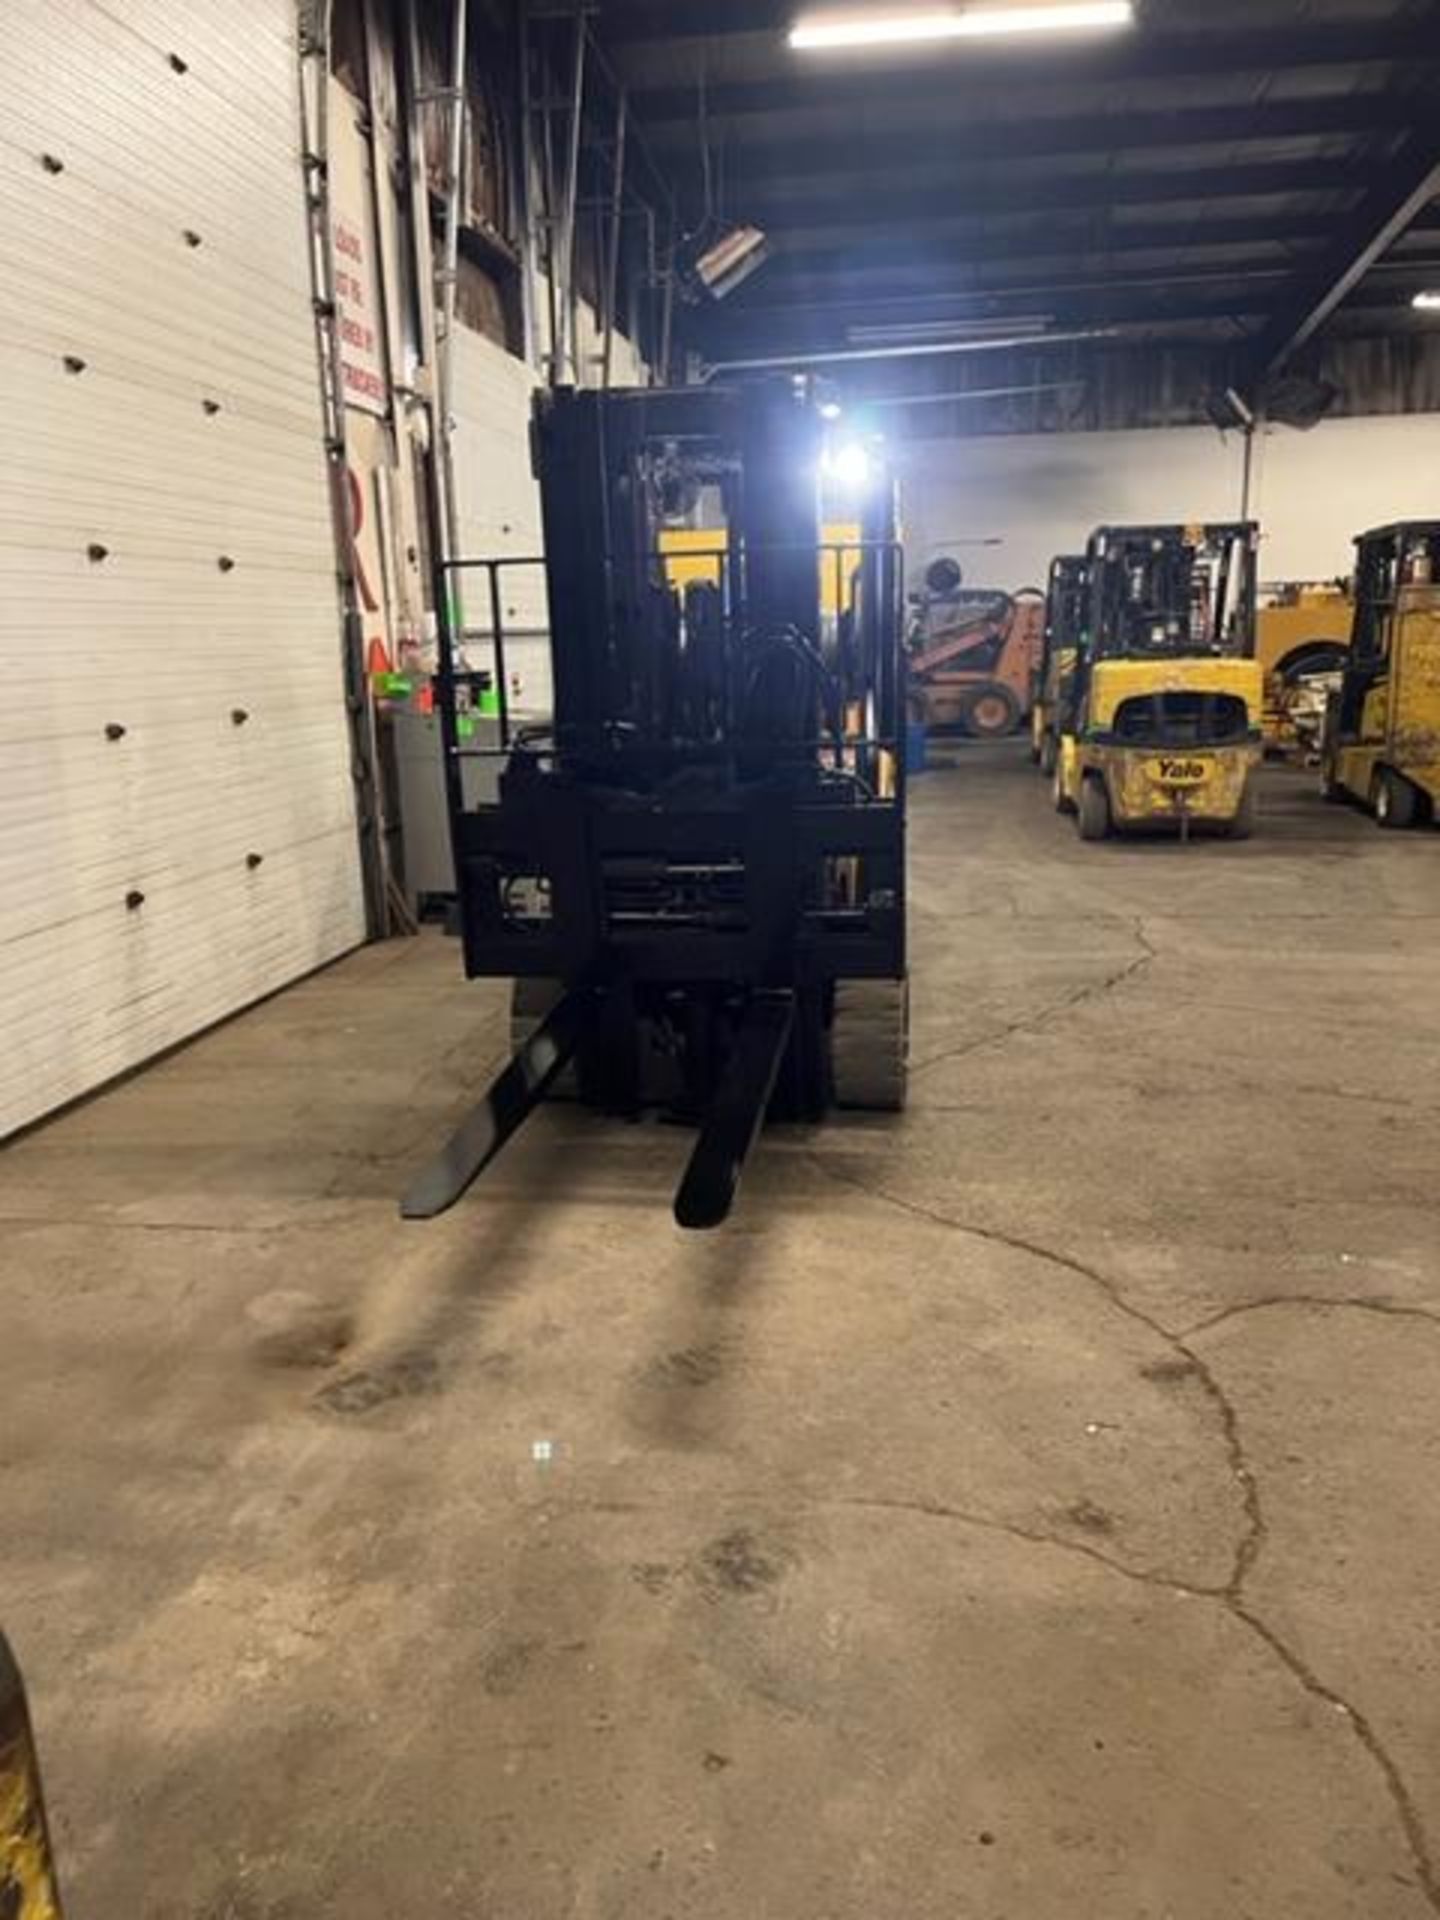 FREE CUSTOMS - NICE 2017 Yale model 80 - 8,000lbs Capacity Forklift LPG (propane) with 54" forks - Image 2 of 4